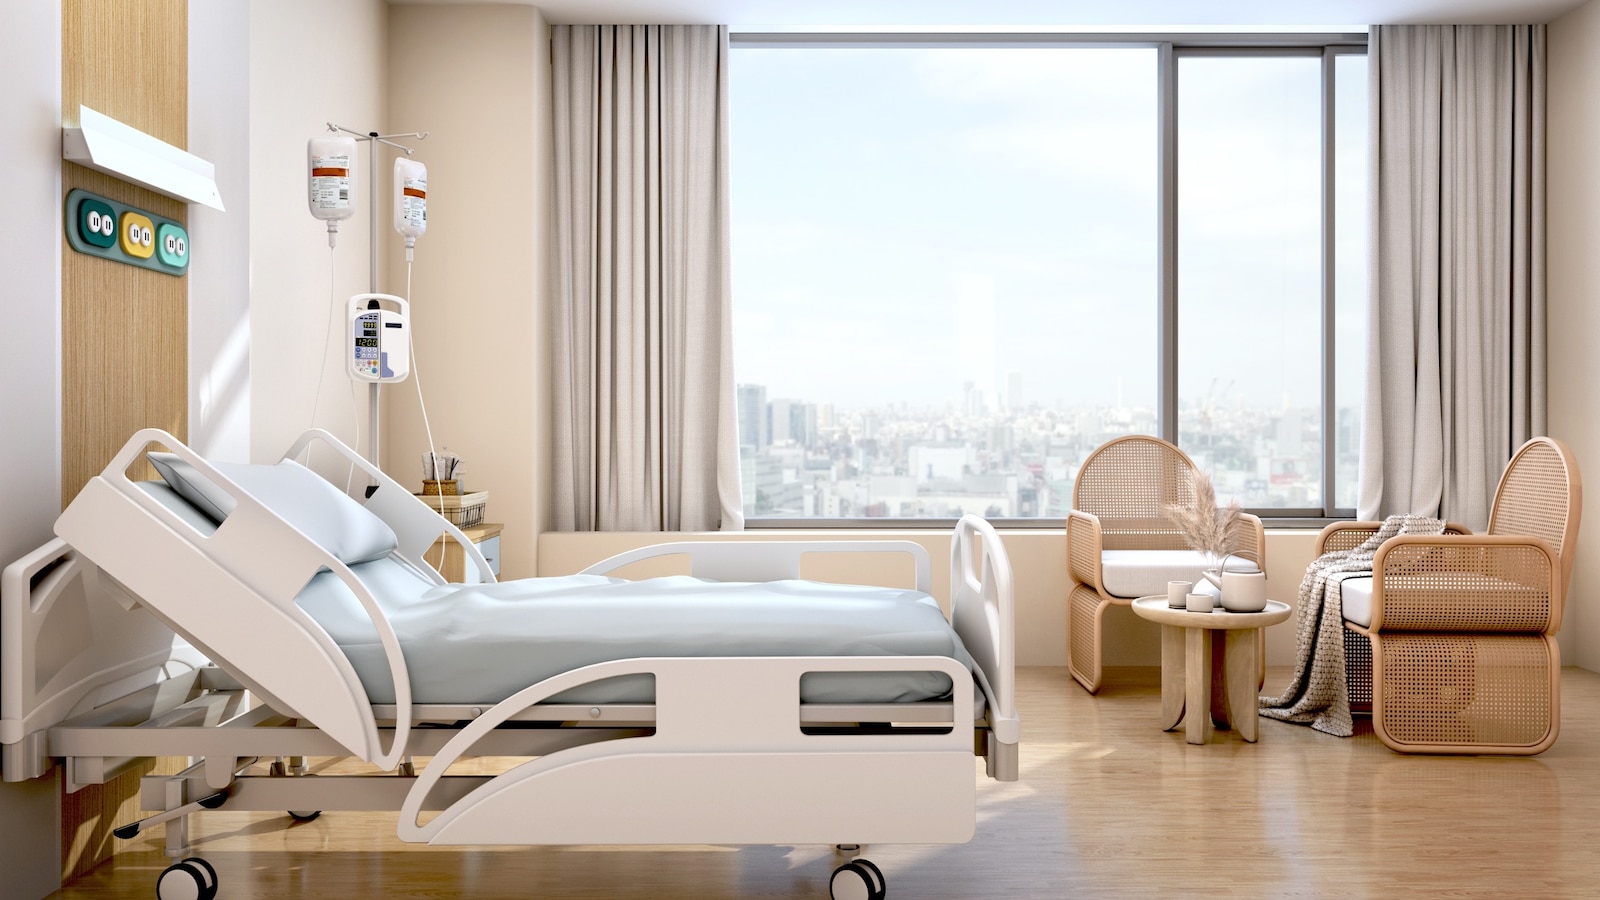 Hospitals cash in on a private equity-backed trend: Concierge physician care